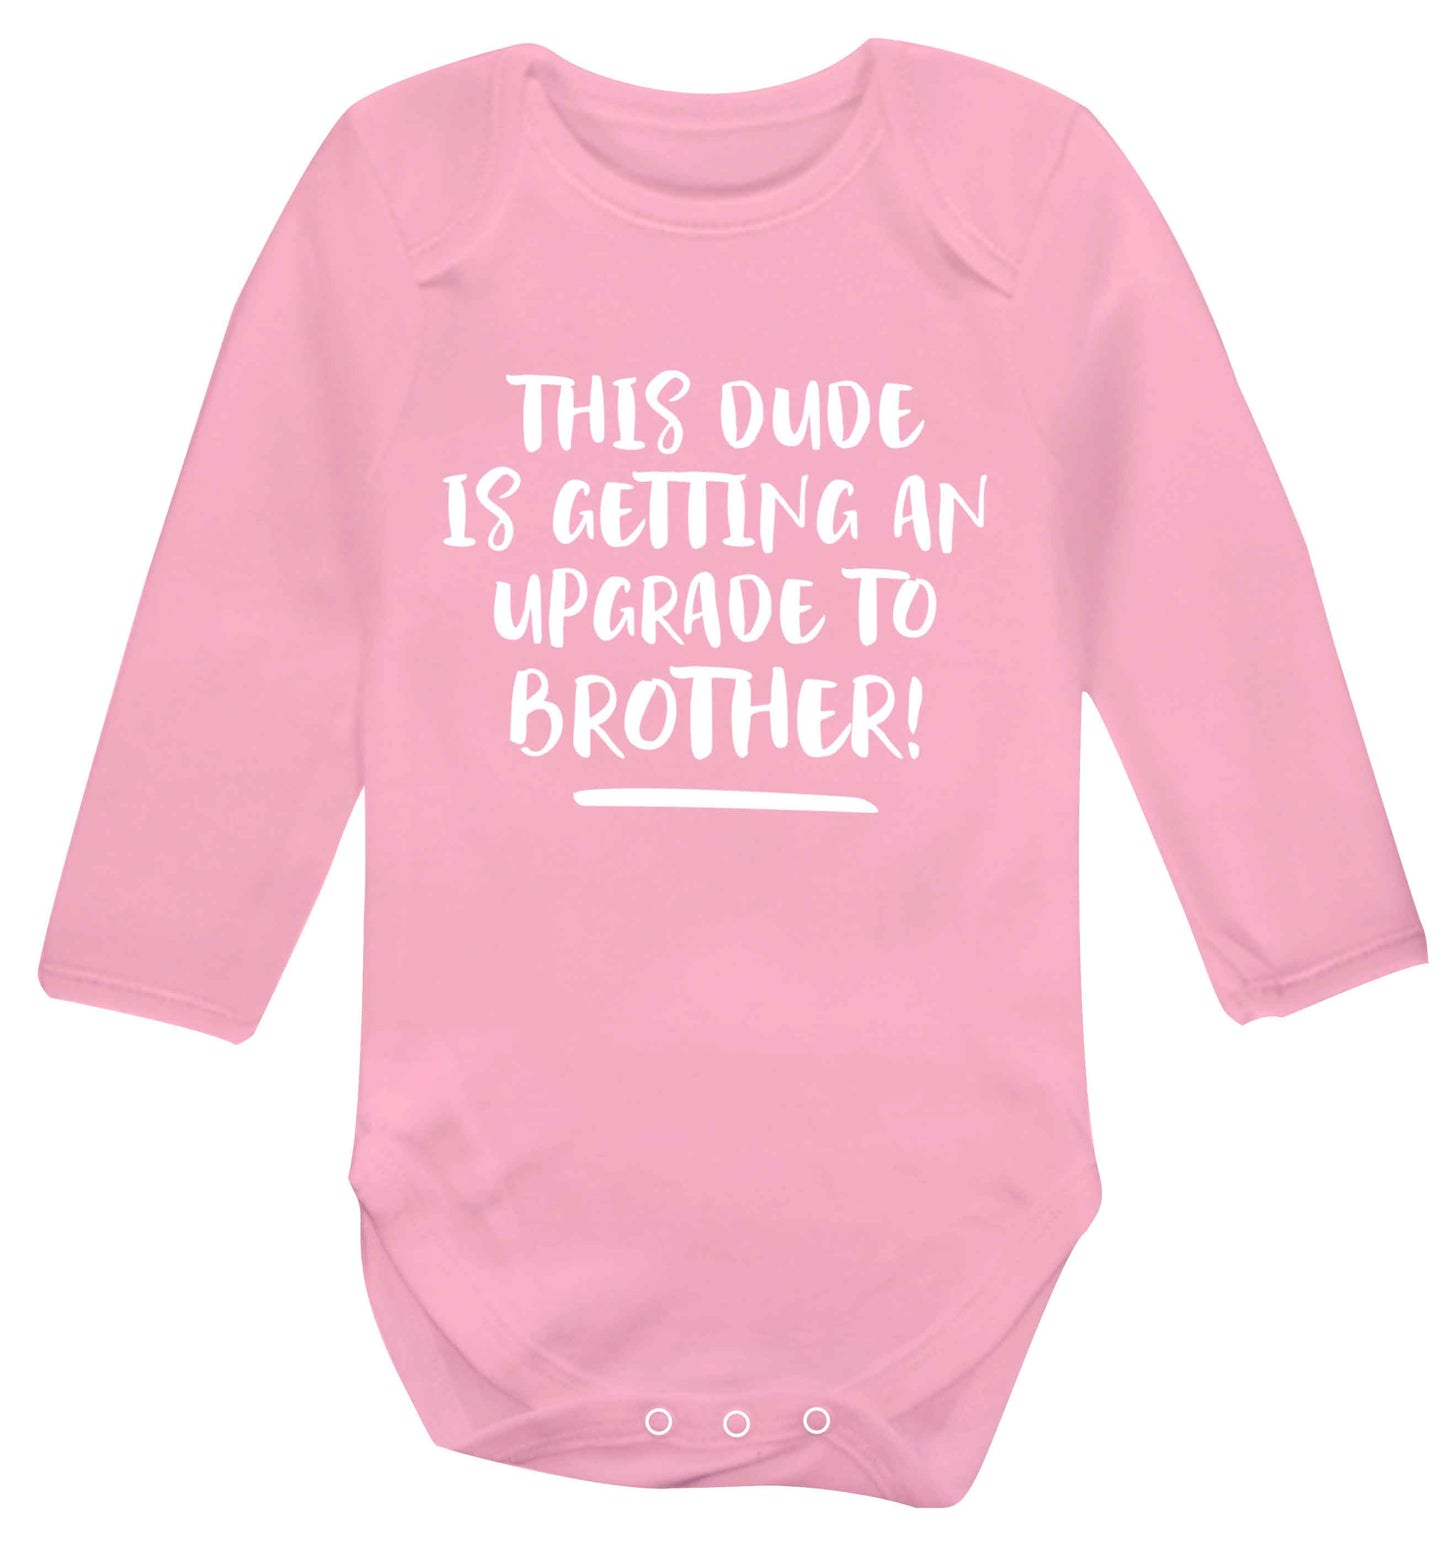 This dude is getting an upgrade to brother! Baby Vest long sleeved pale pink 6-12 months